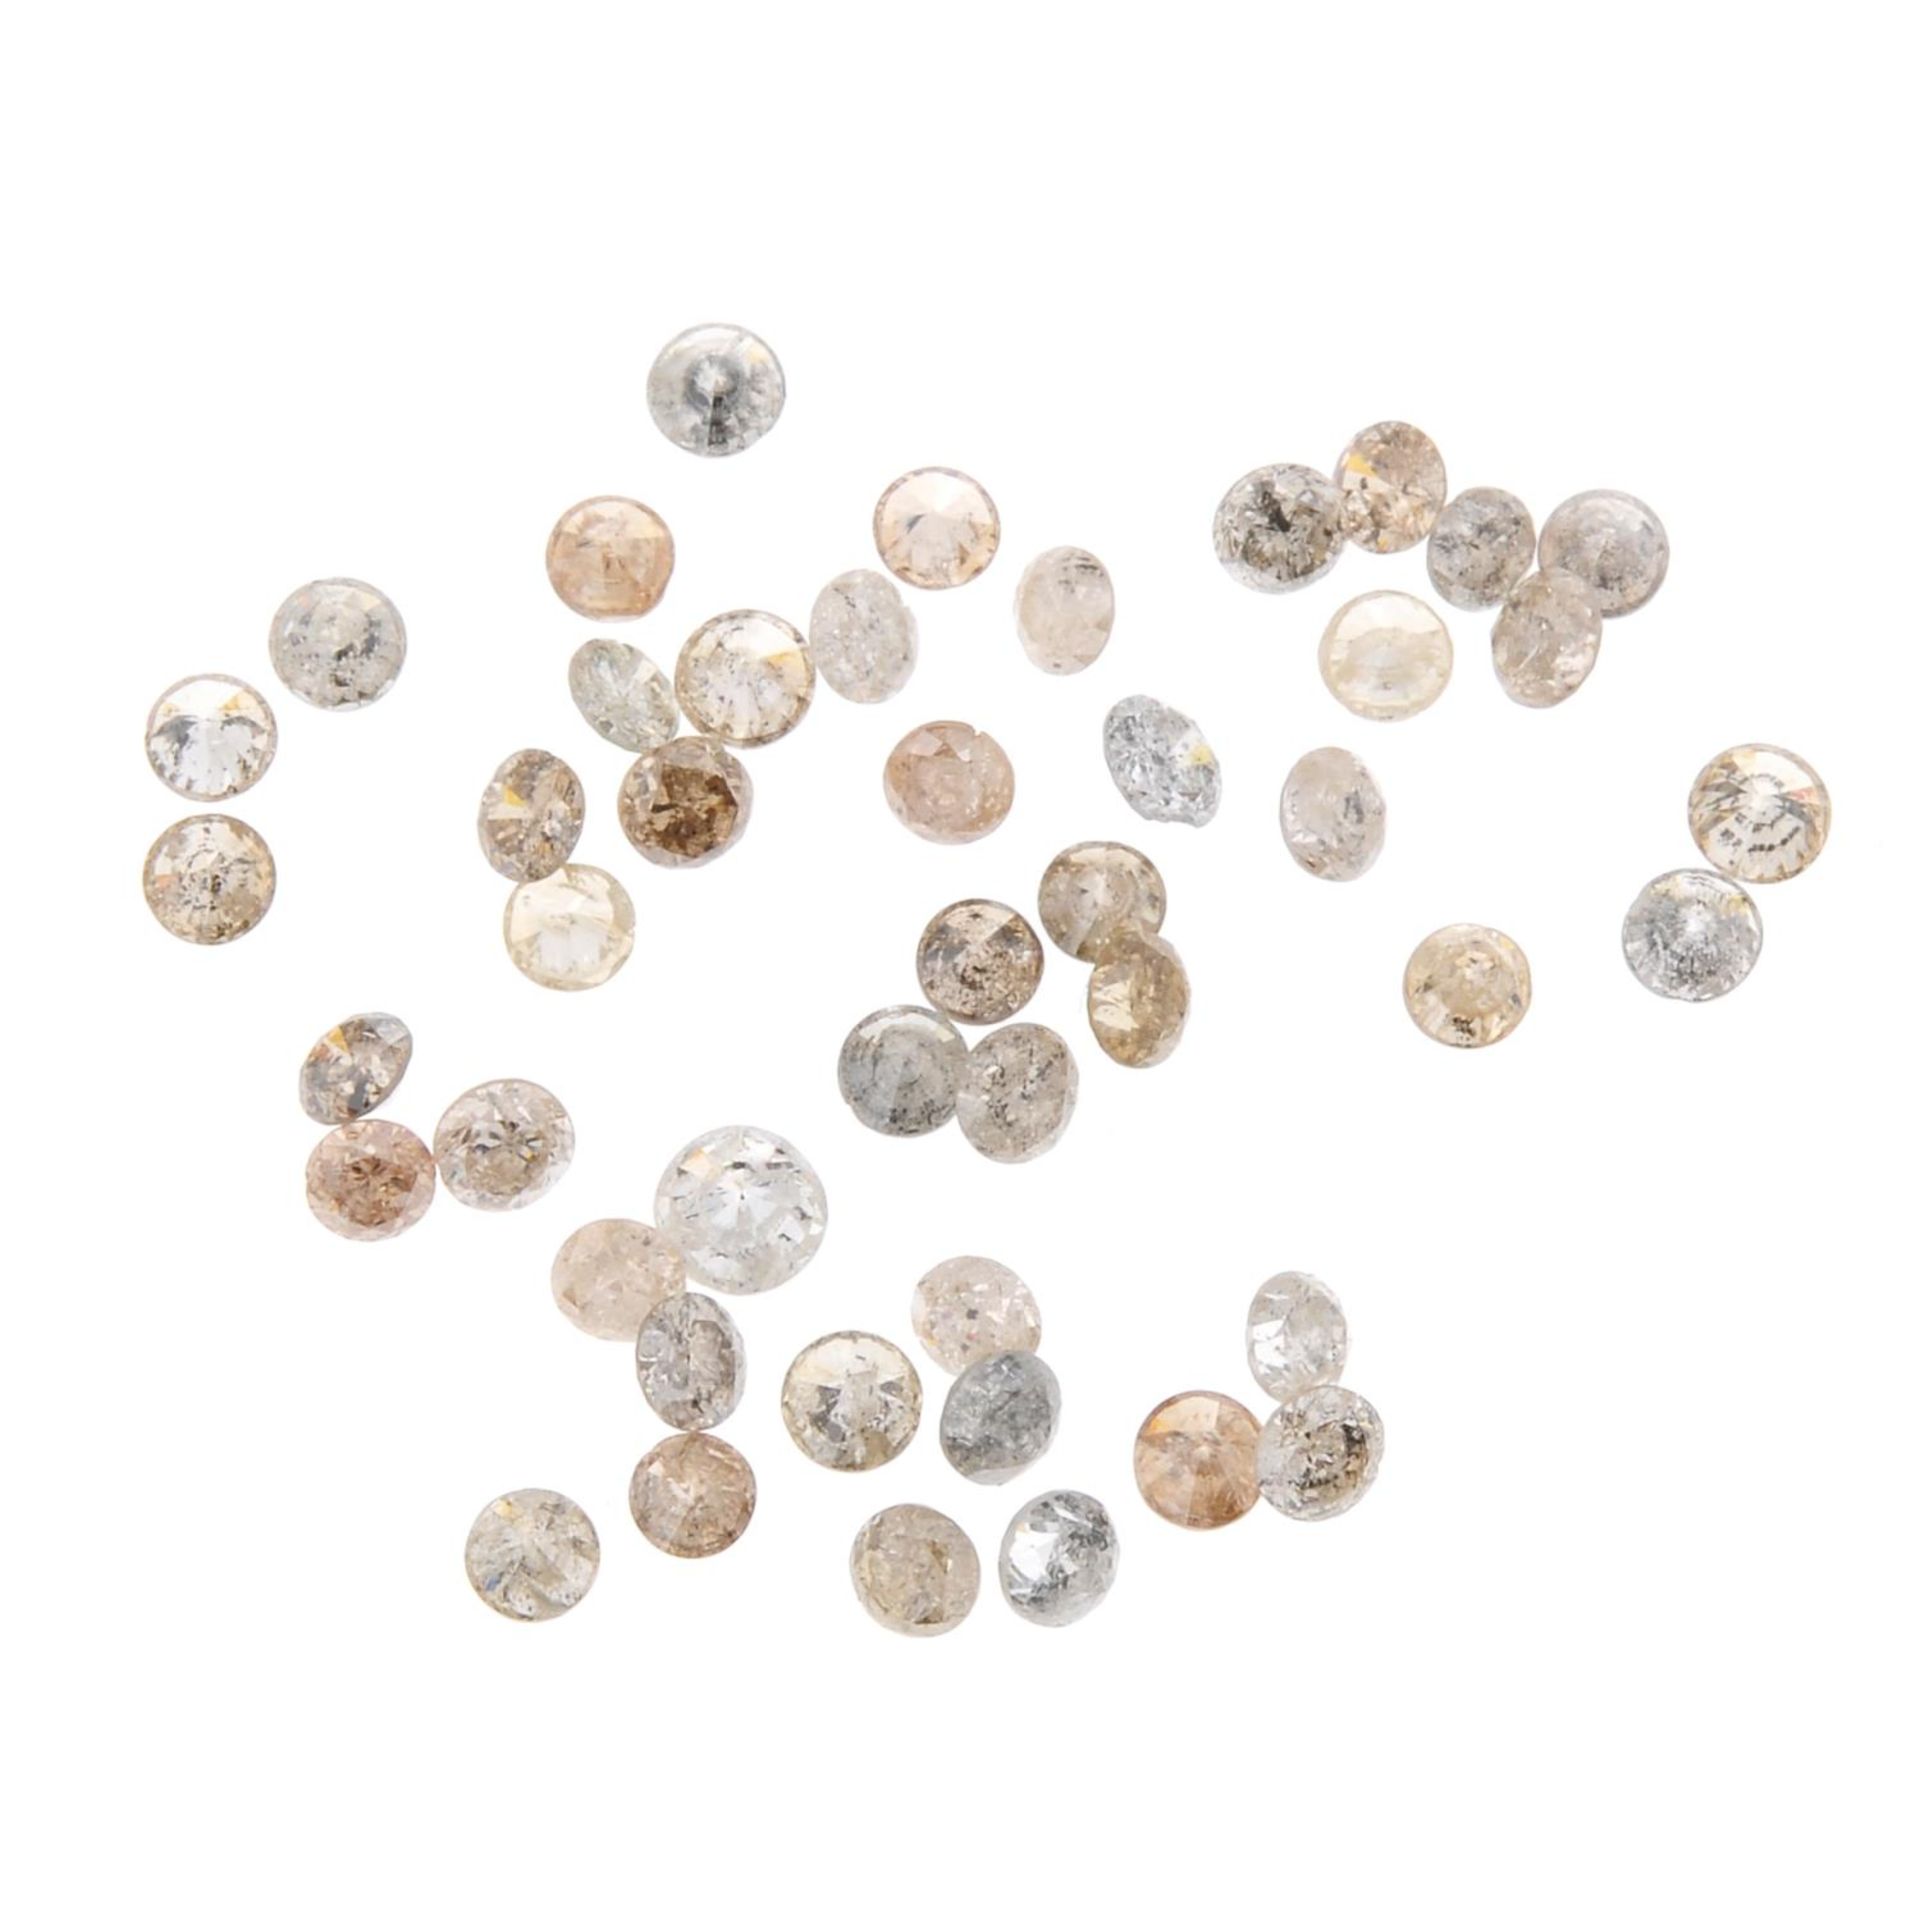 A small selection of round brilliant-cut diamonds and 'brown' melee diamonds.